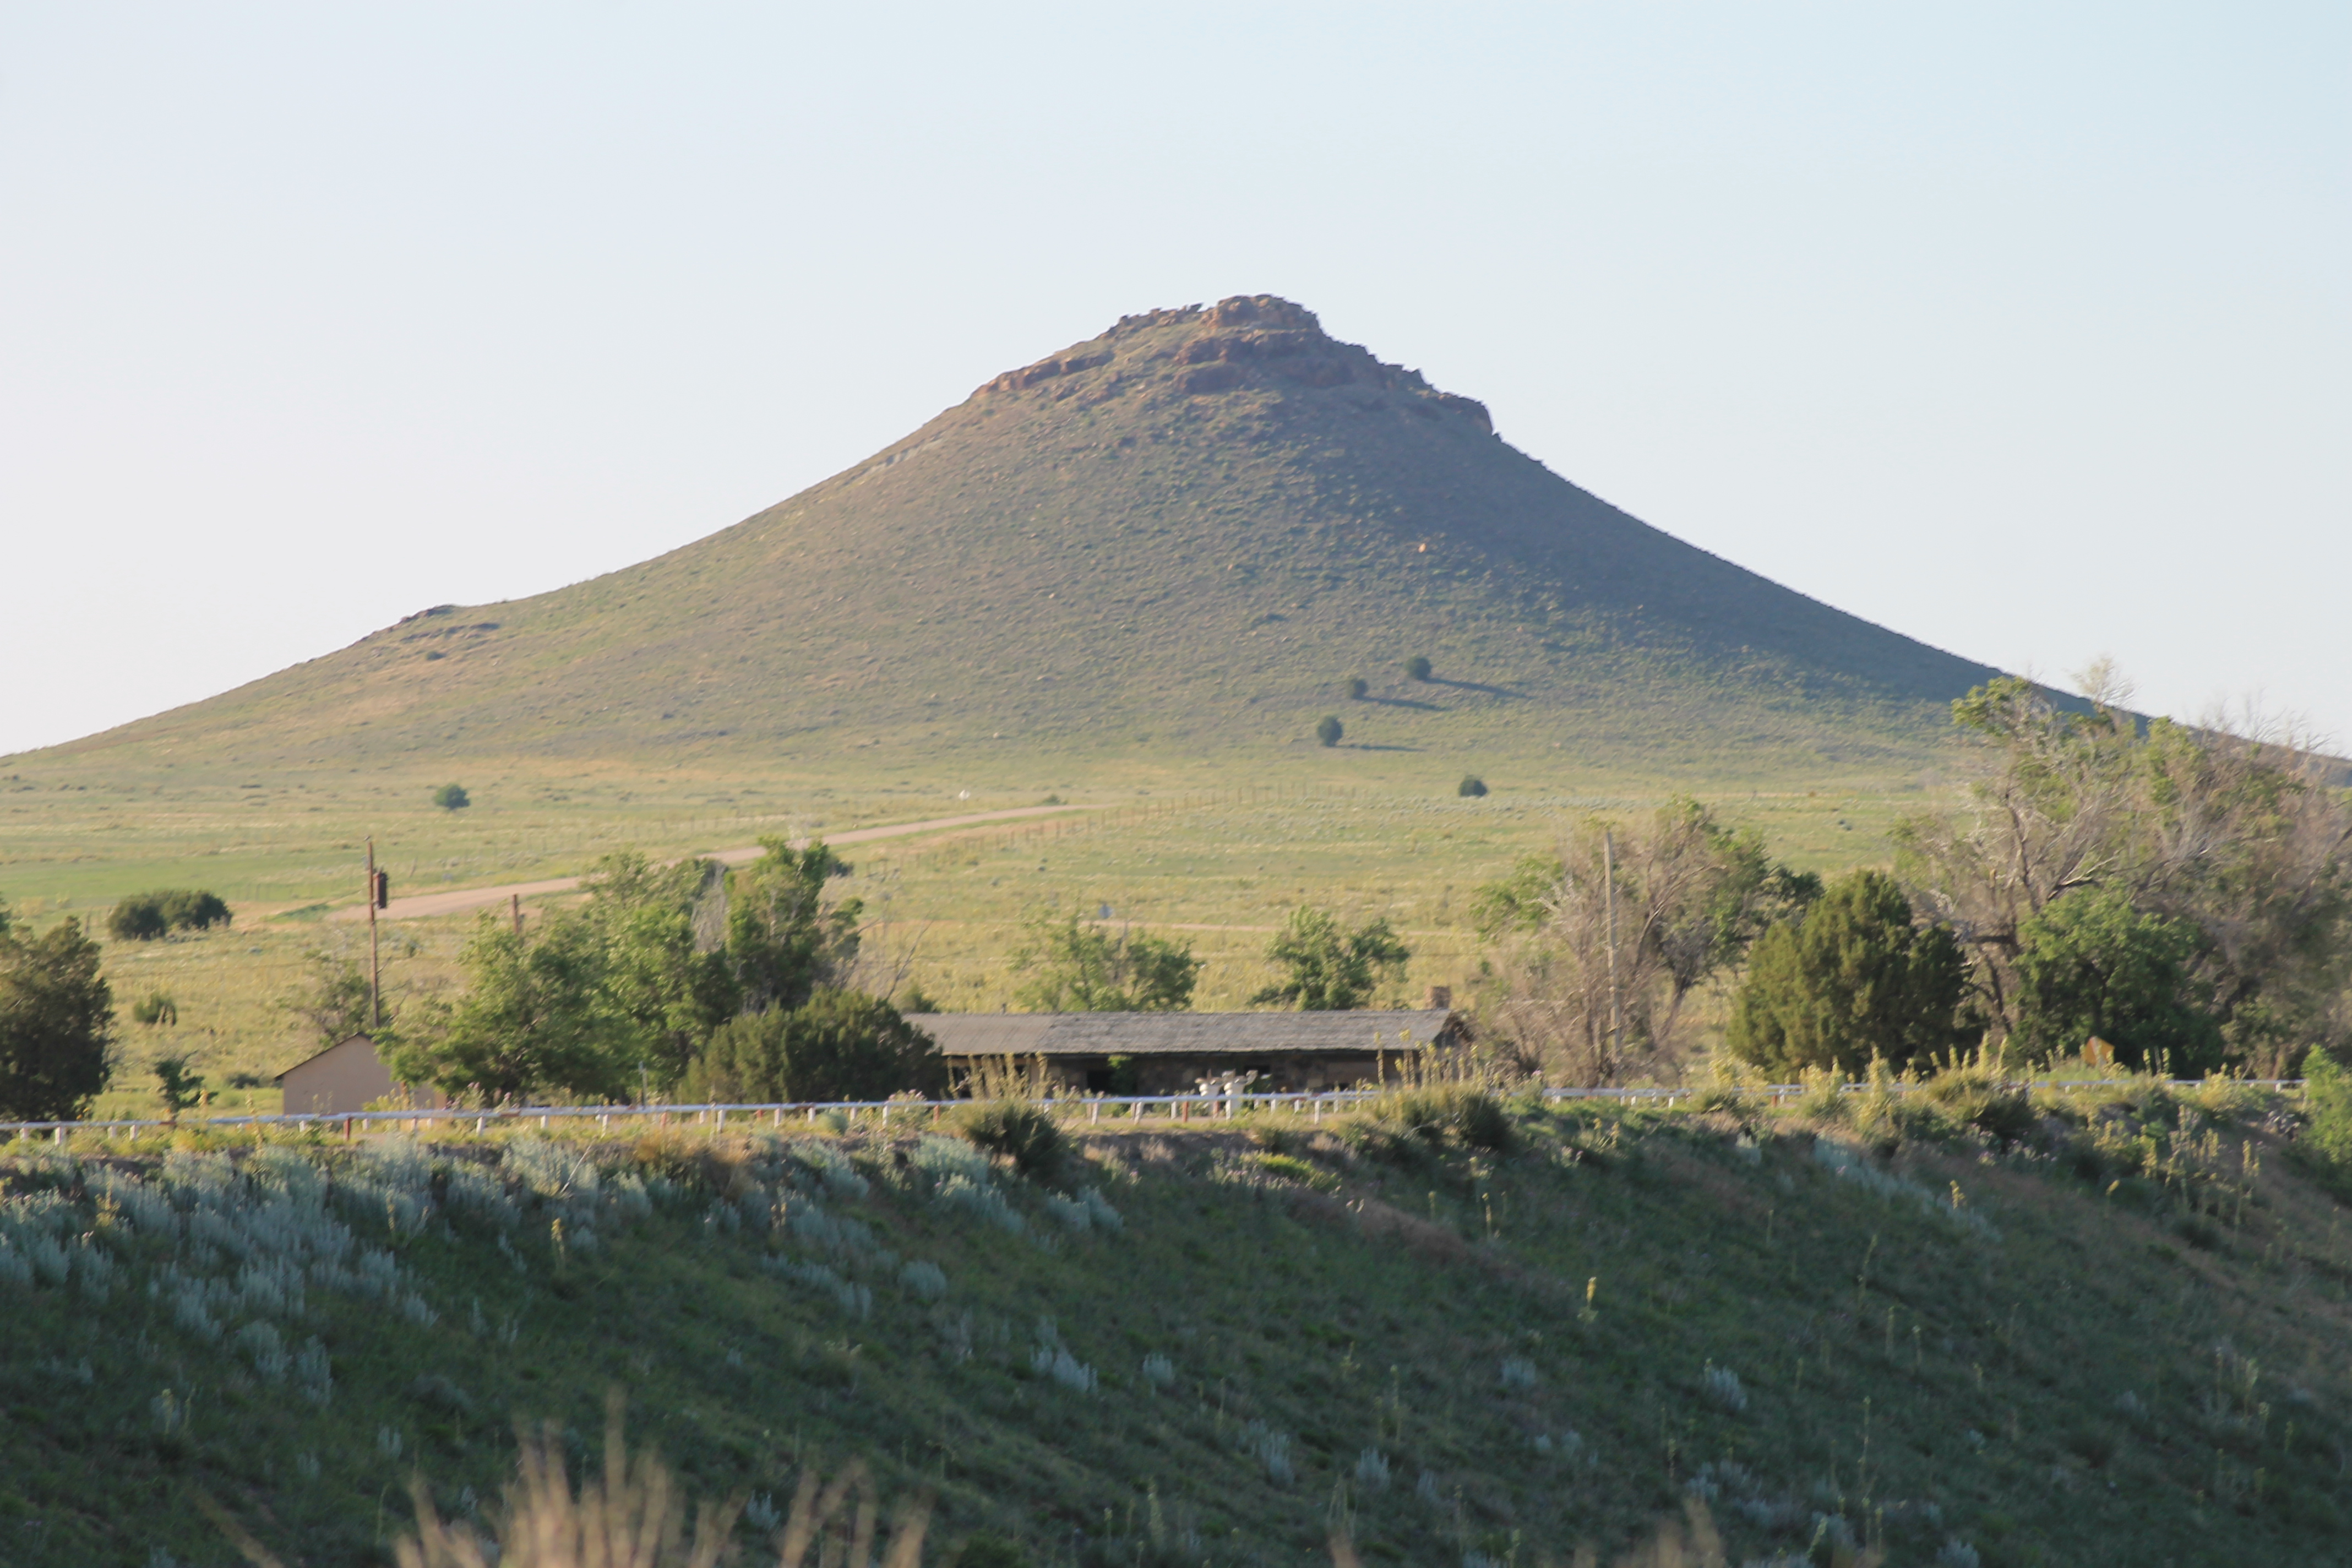 The Town of Two Buttes.